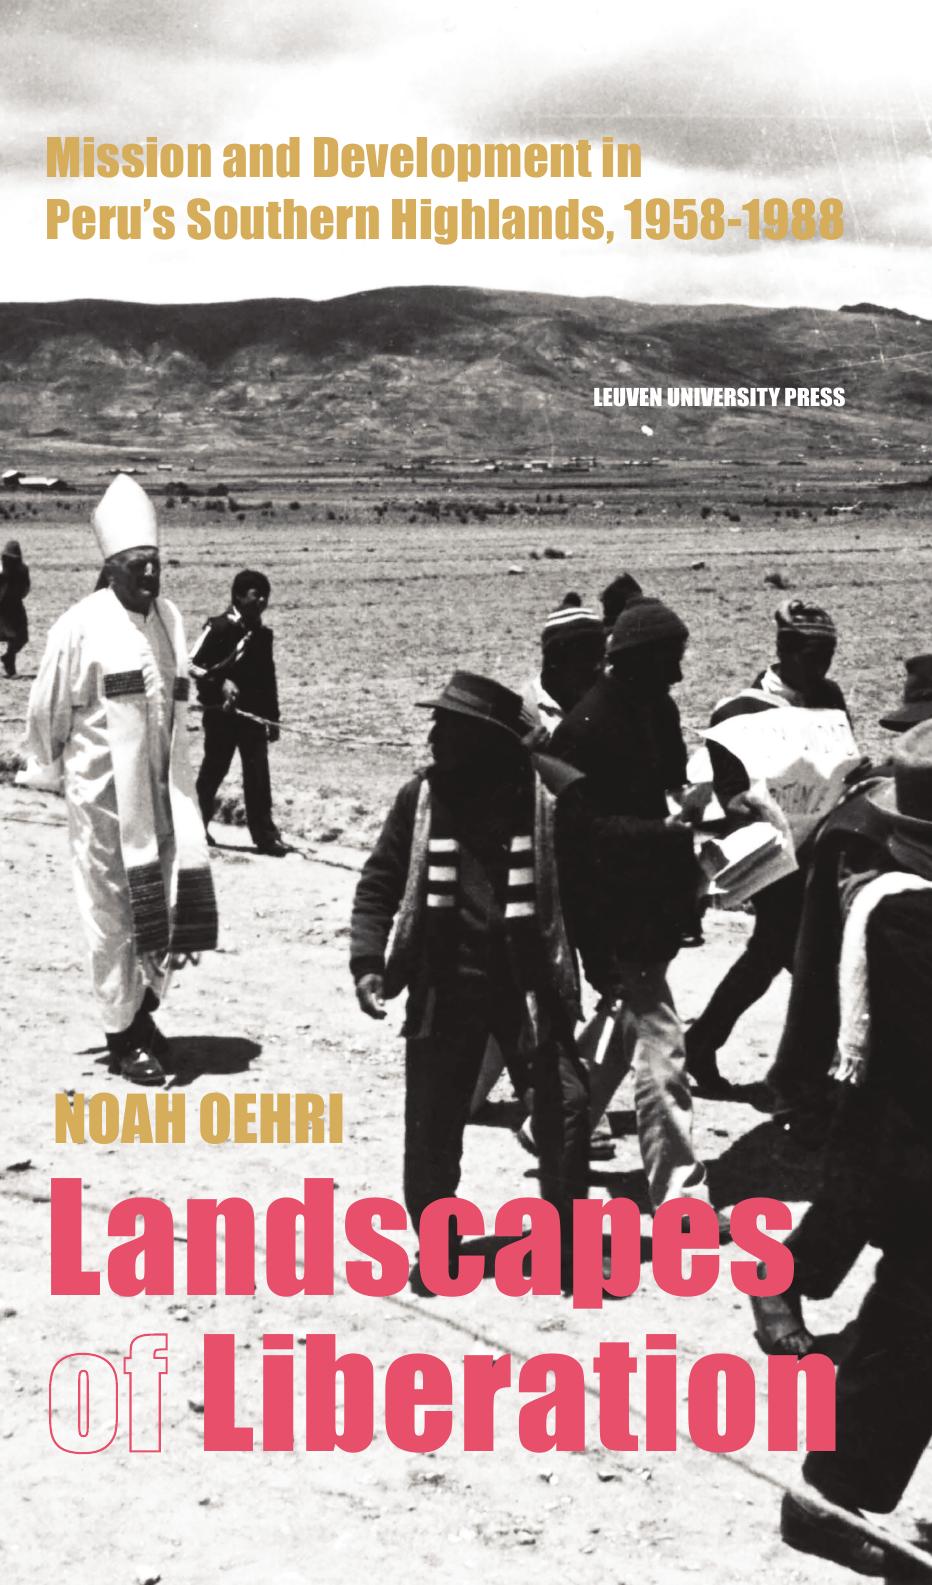 Landscapes of liberation : Mission and development in Peru's Southern Highlands, 1958-1988 by Noah Oehri